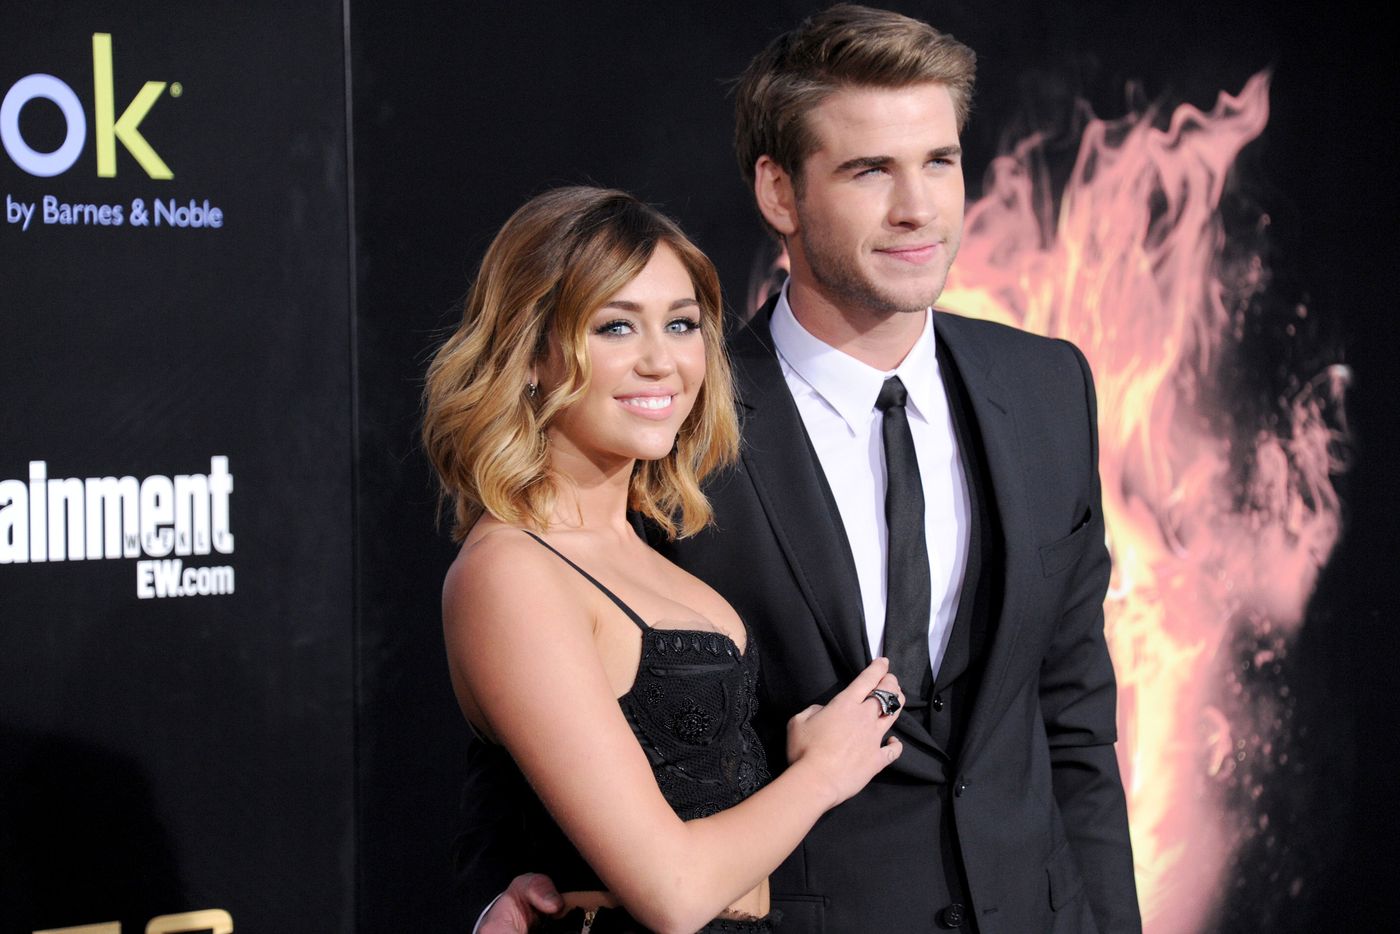 Cyrus dated miley which hemsworth Hemsworth who